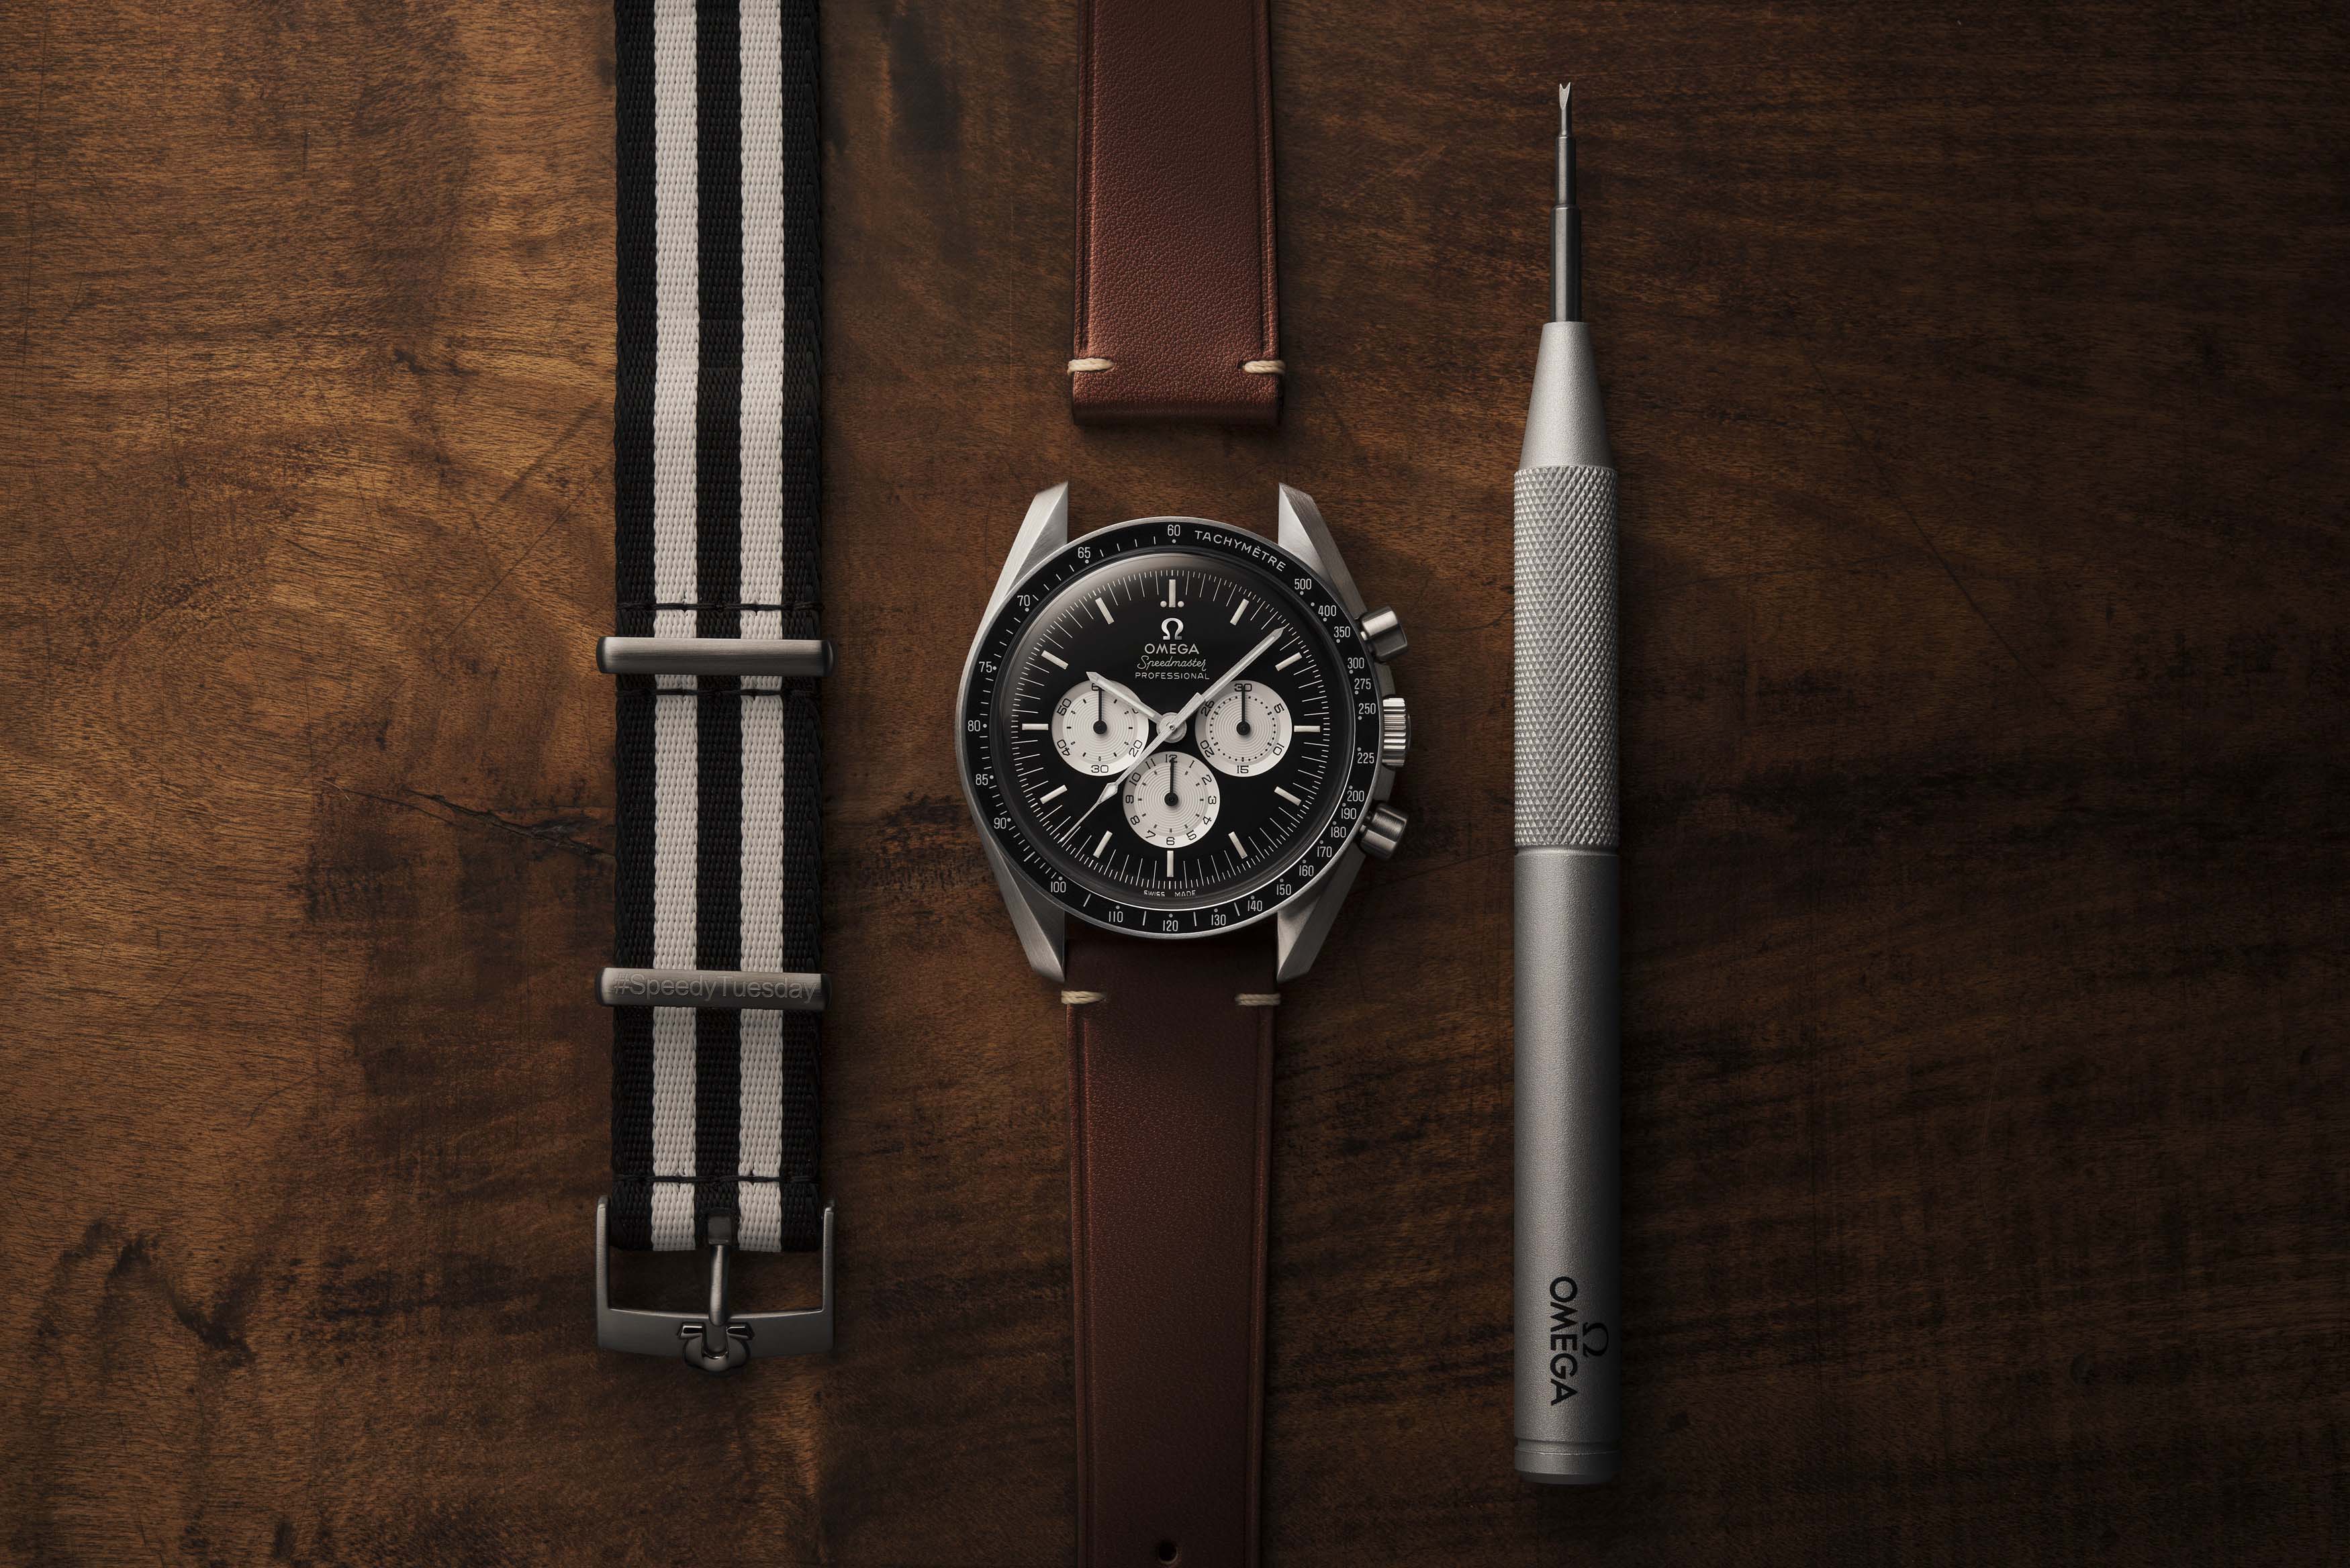 shop.hodinkee quick word about that speedmaster thing